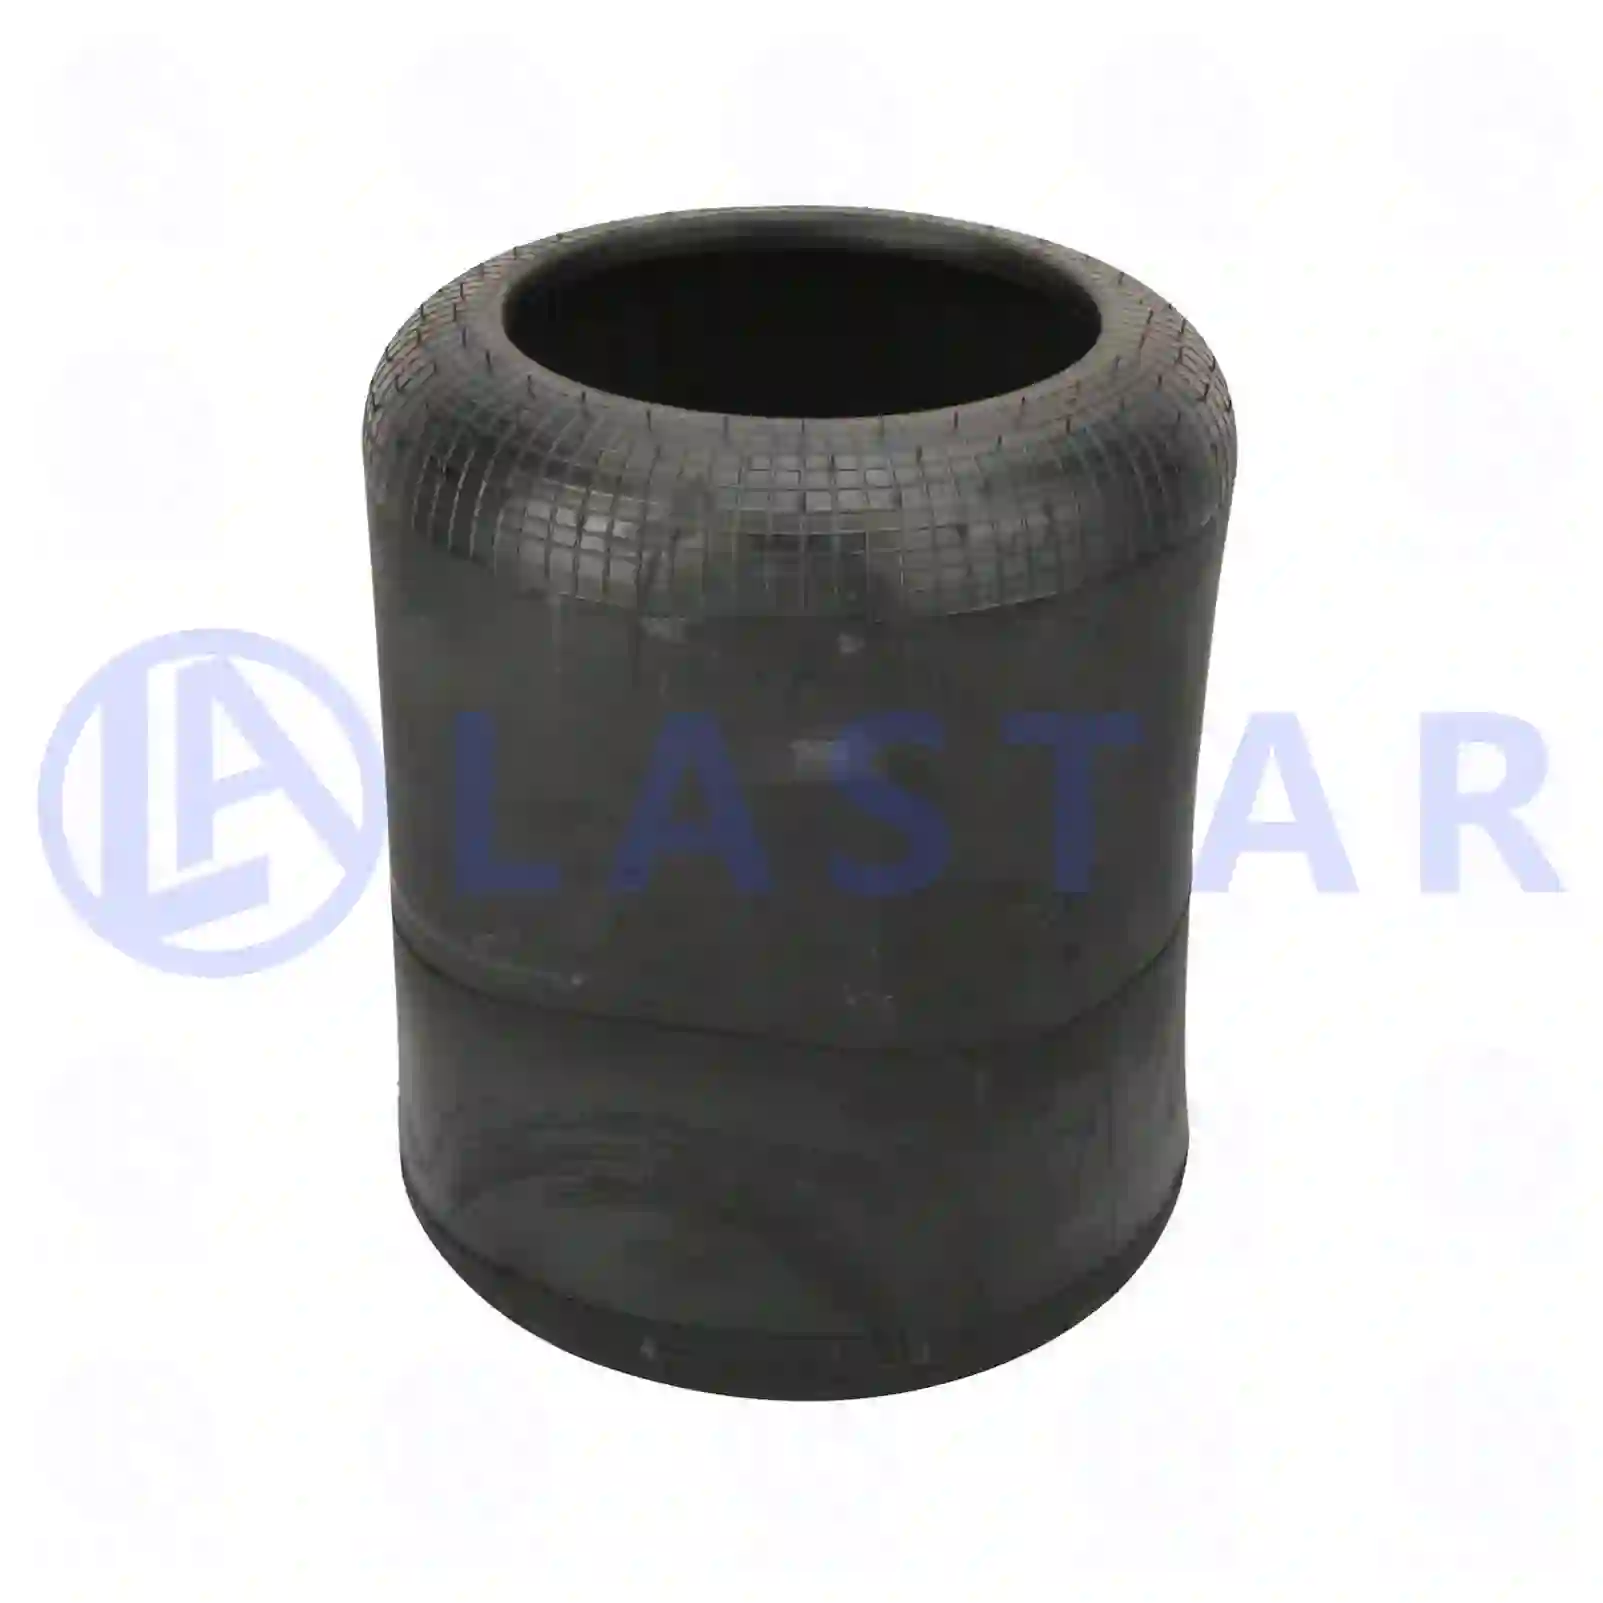 Air spring, without piston, 77728711, 0220024600, 0578361, 578361, 2680662000, 36436010006, 81436010018, 88436012206, 90831120018, N1011016348, 100110200, 100112251, MLF7089, 750209 ||  77728711 Lastar Spare Part | Truck Spare Parts, Auotomotive Spare Parts Air spring, without piston, 77728711, 0220024600, 0578361, 578361, 2680662000, 36436010006, 81436010018, 88436012206, 90831120018, N1011016348, 100110200, 100112251, MLF7089, 750209 ||  77728711 Lastar Spare Part | Truck Spare Parts, Auotomotive Spare Parts